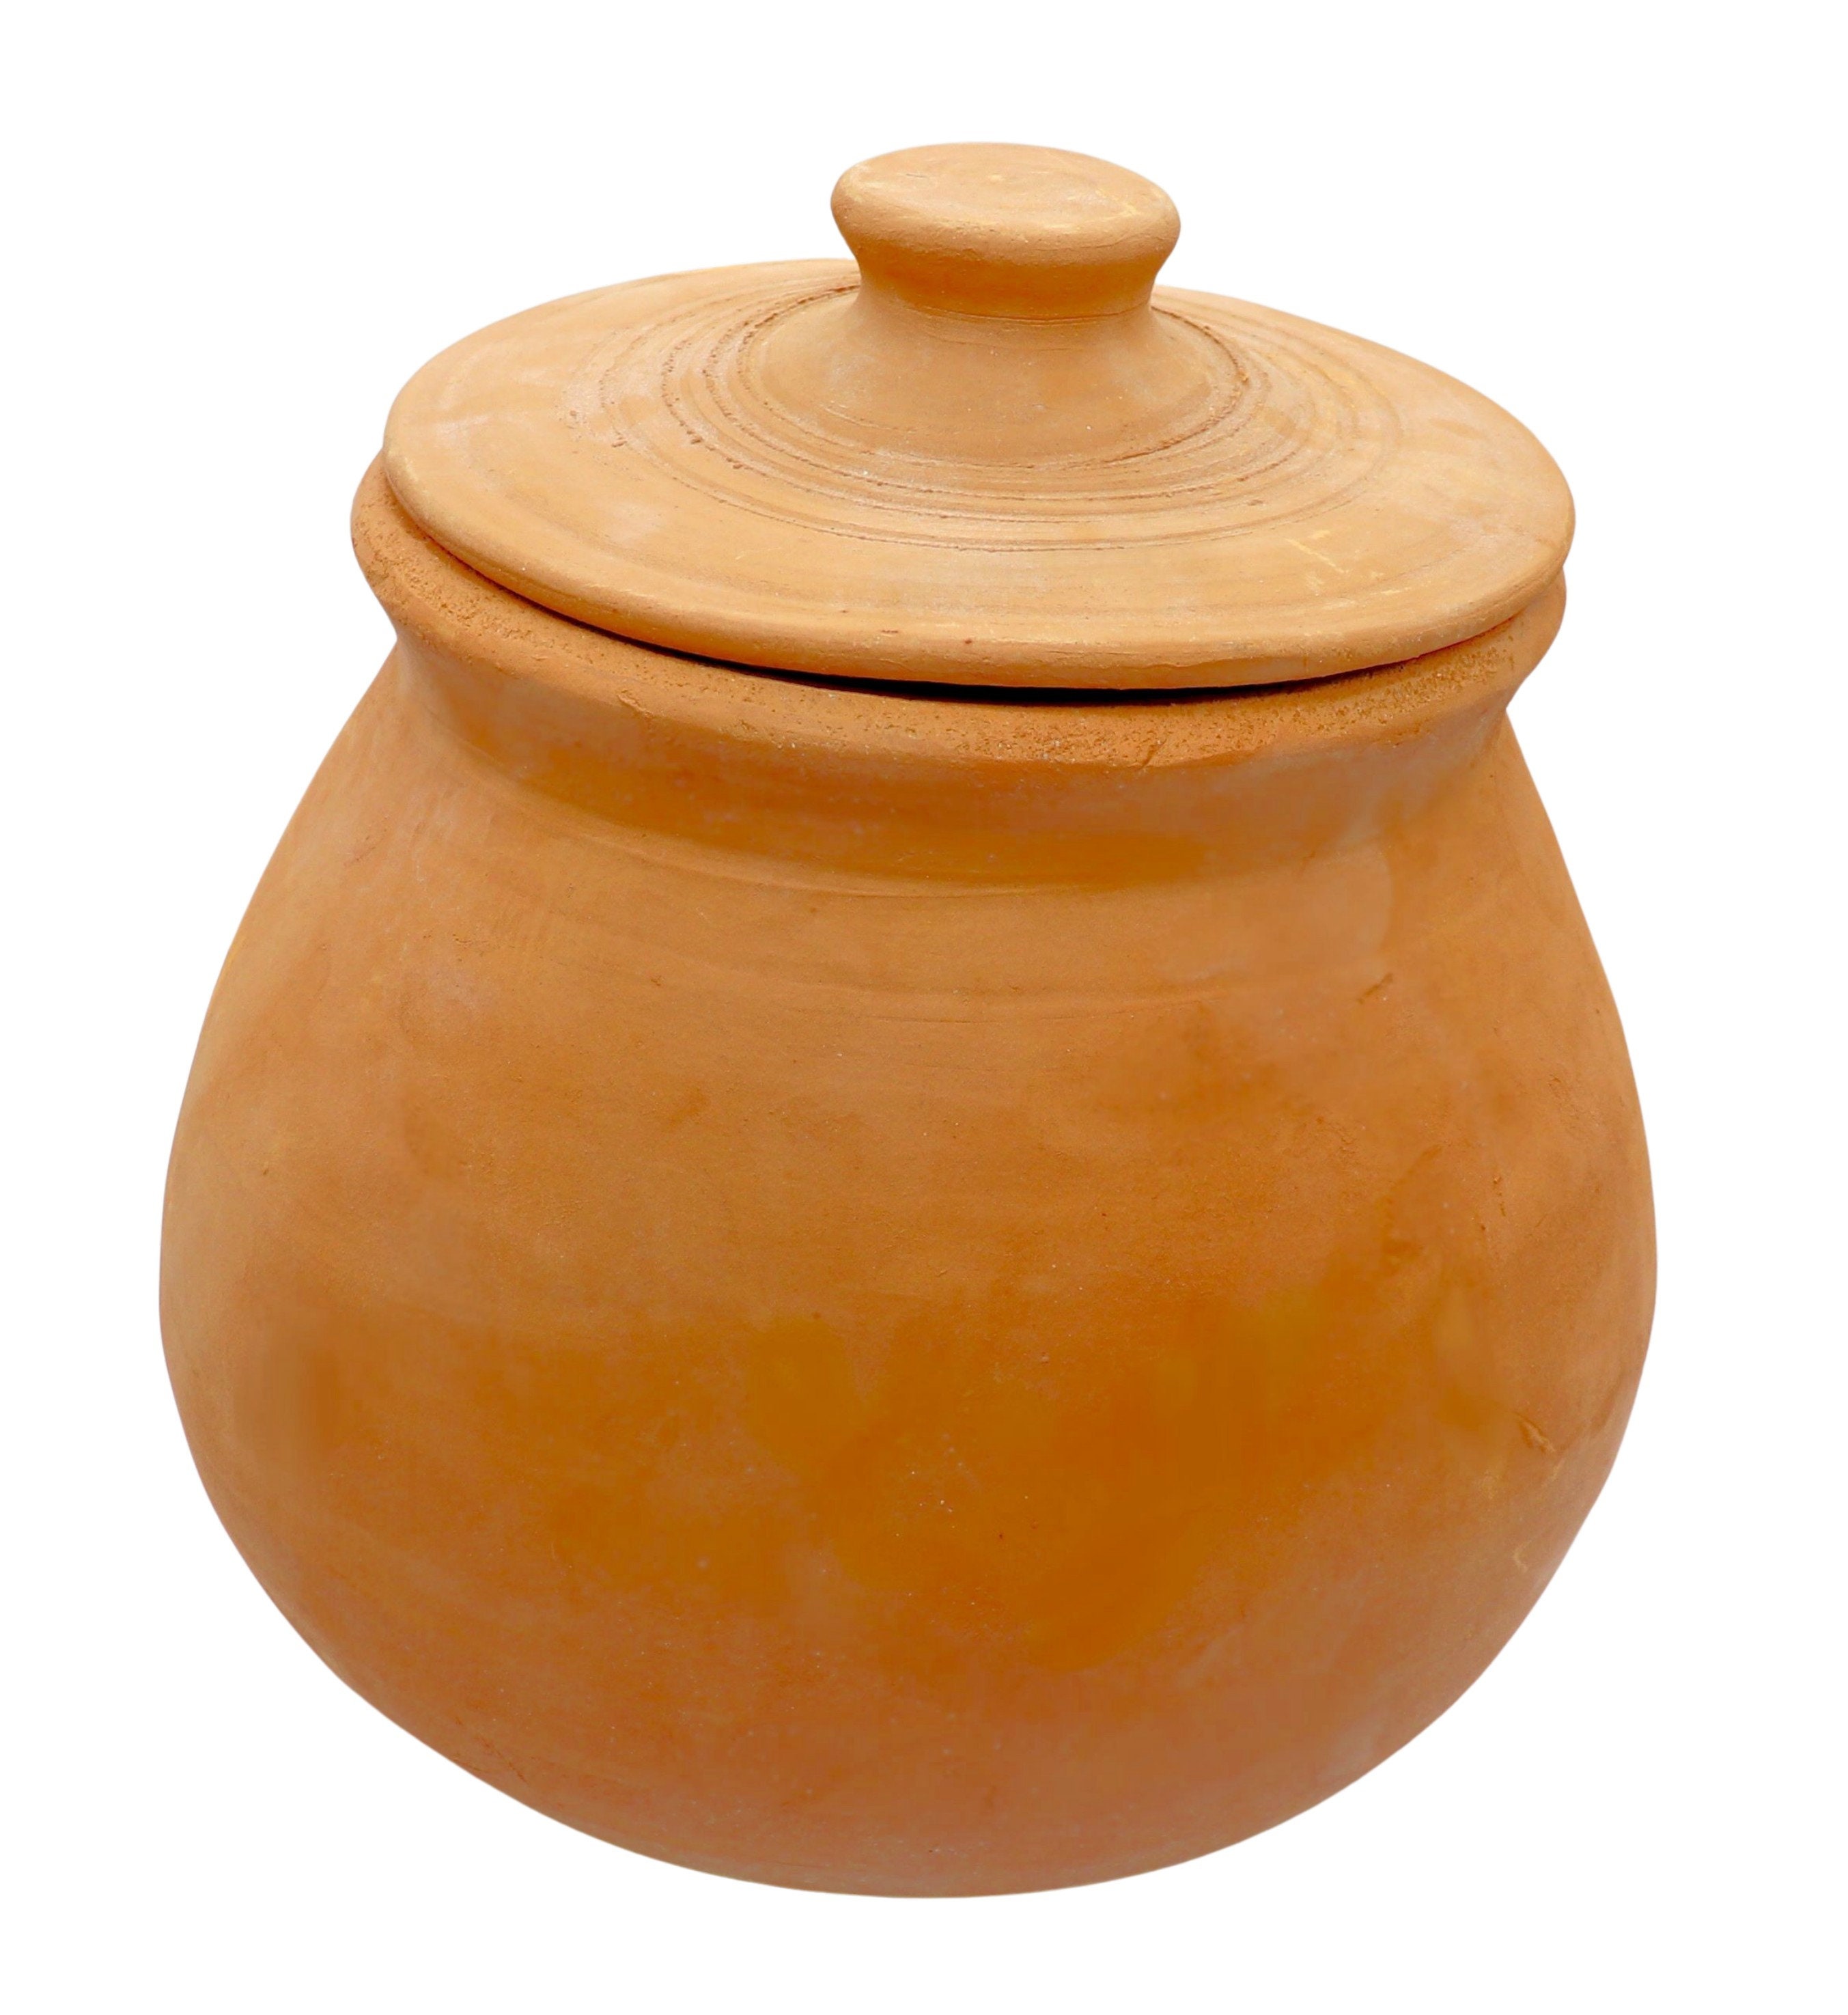 1.9-Quart Ceramic Pots for Cooking with Lid, Clay Pot for Cooking,  Earthenware Pot, Chinese Ceramic Casserole, Earthen Pot Cookware Stew Pot  Stockpot